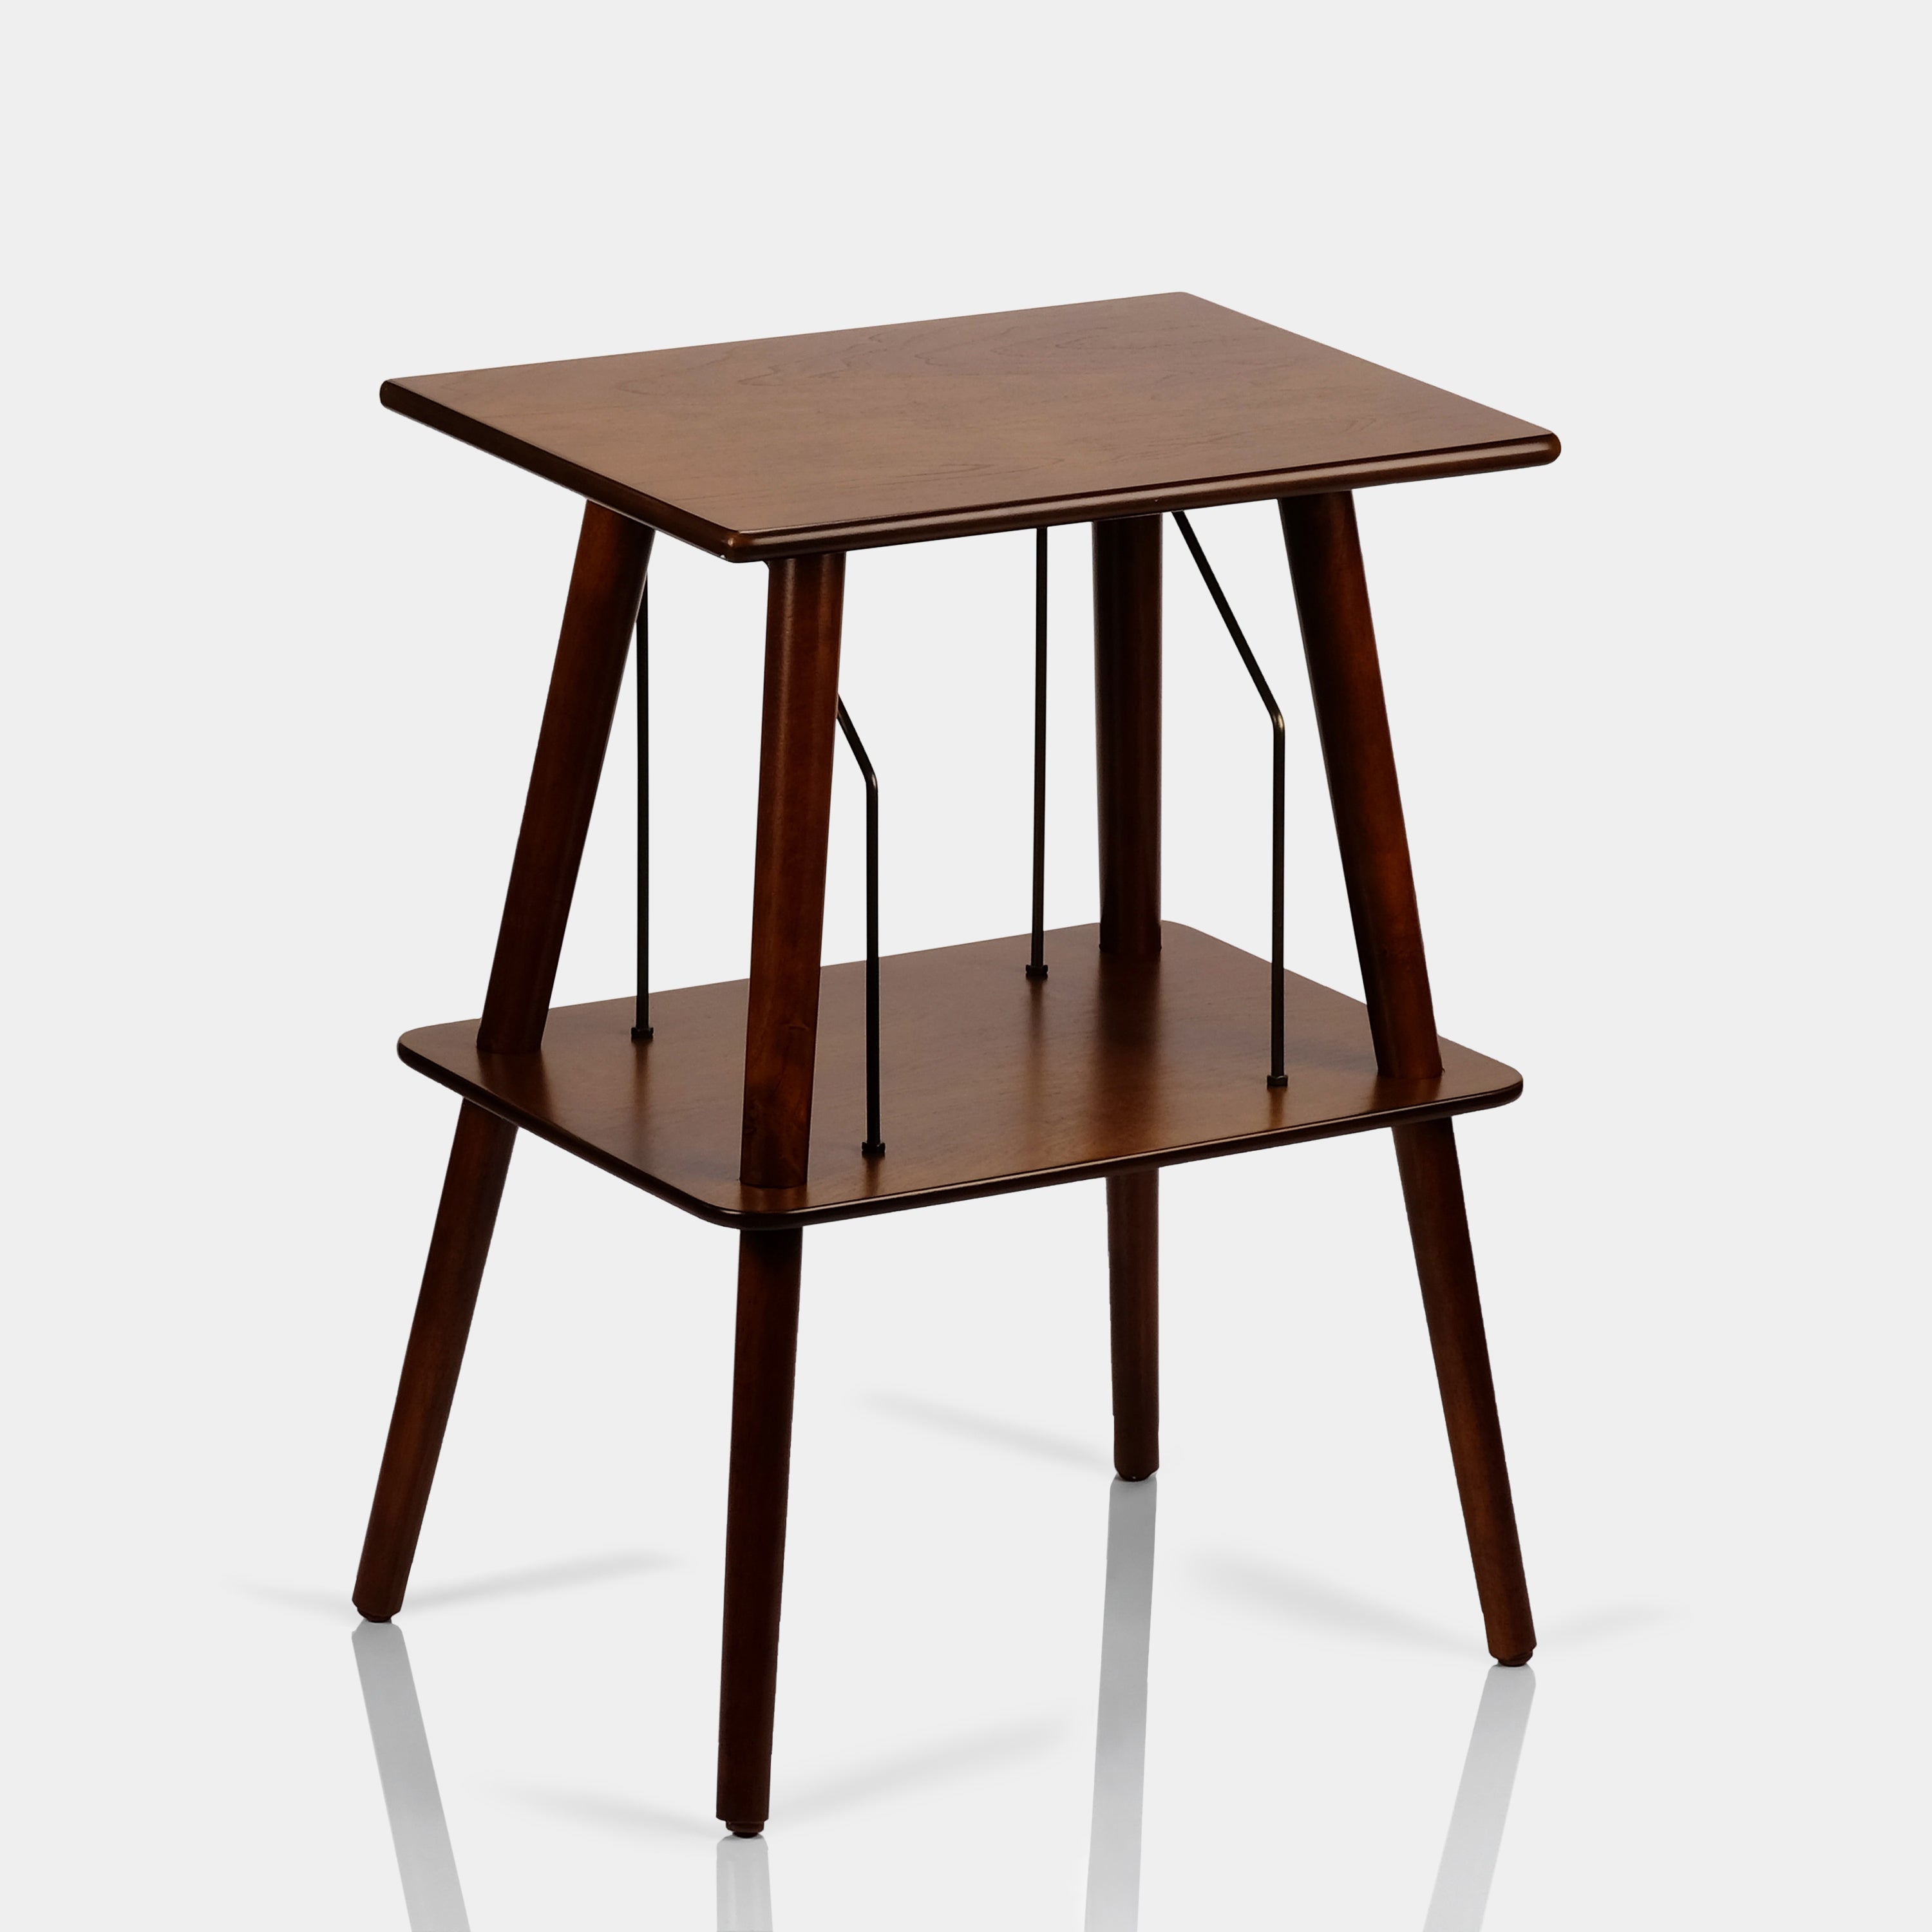 Crosley Manchester Turntable Stand - Mahogany